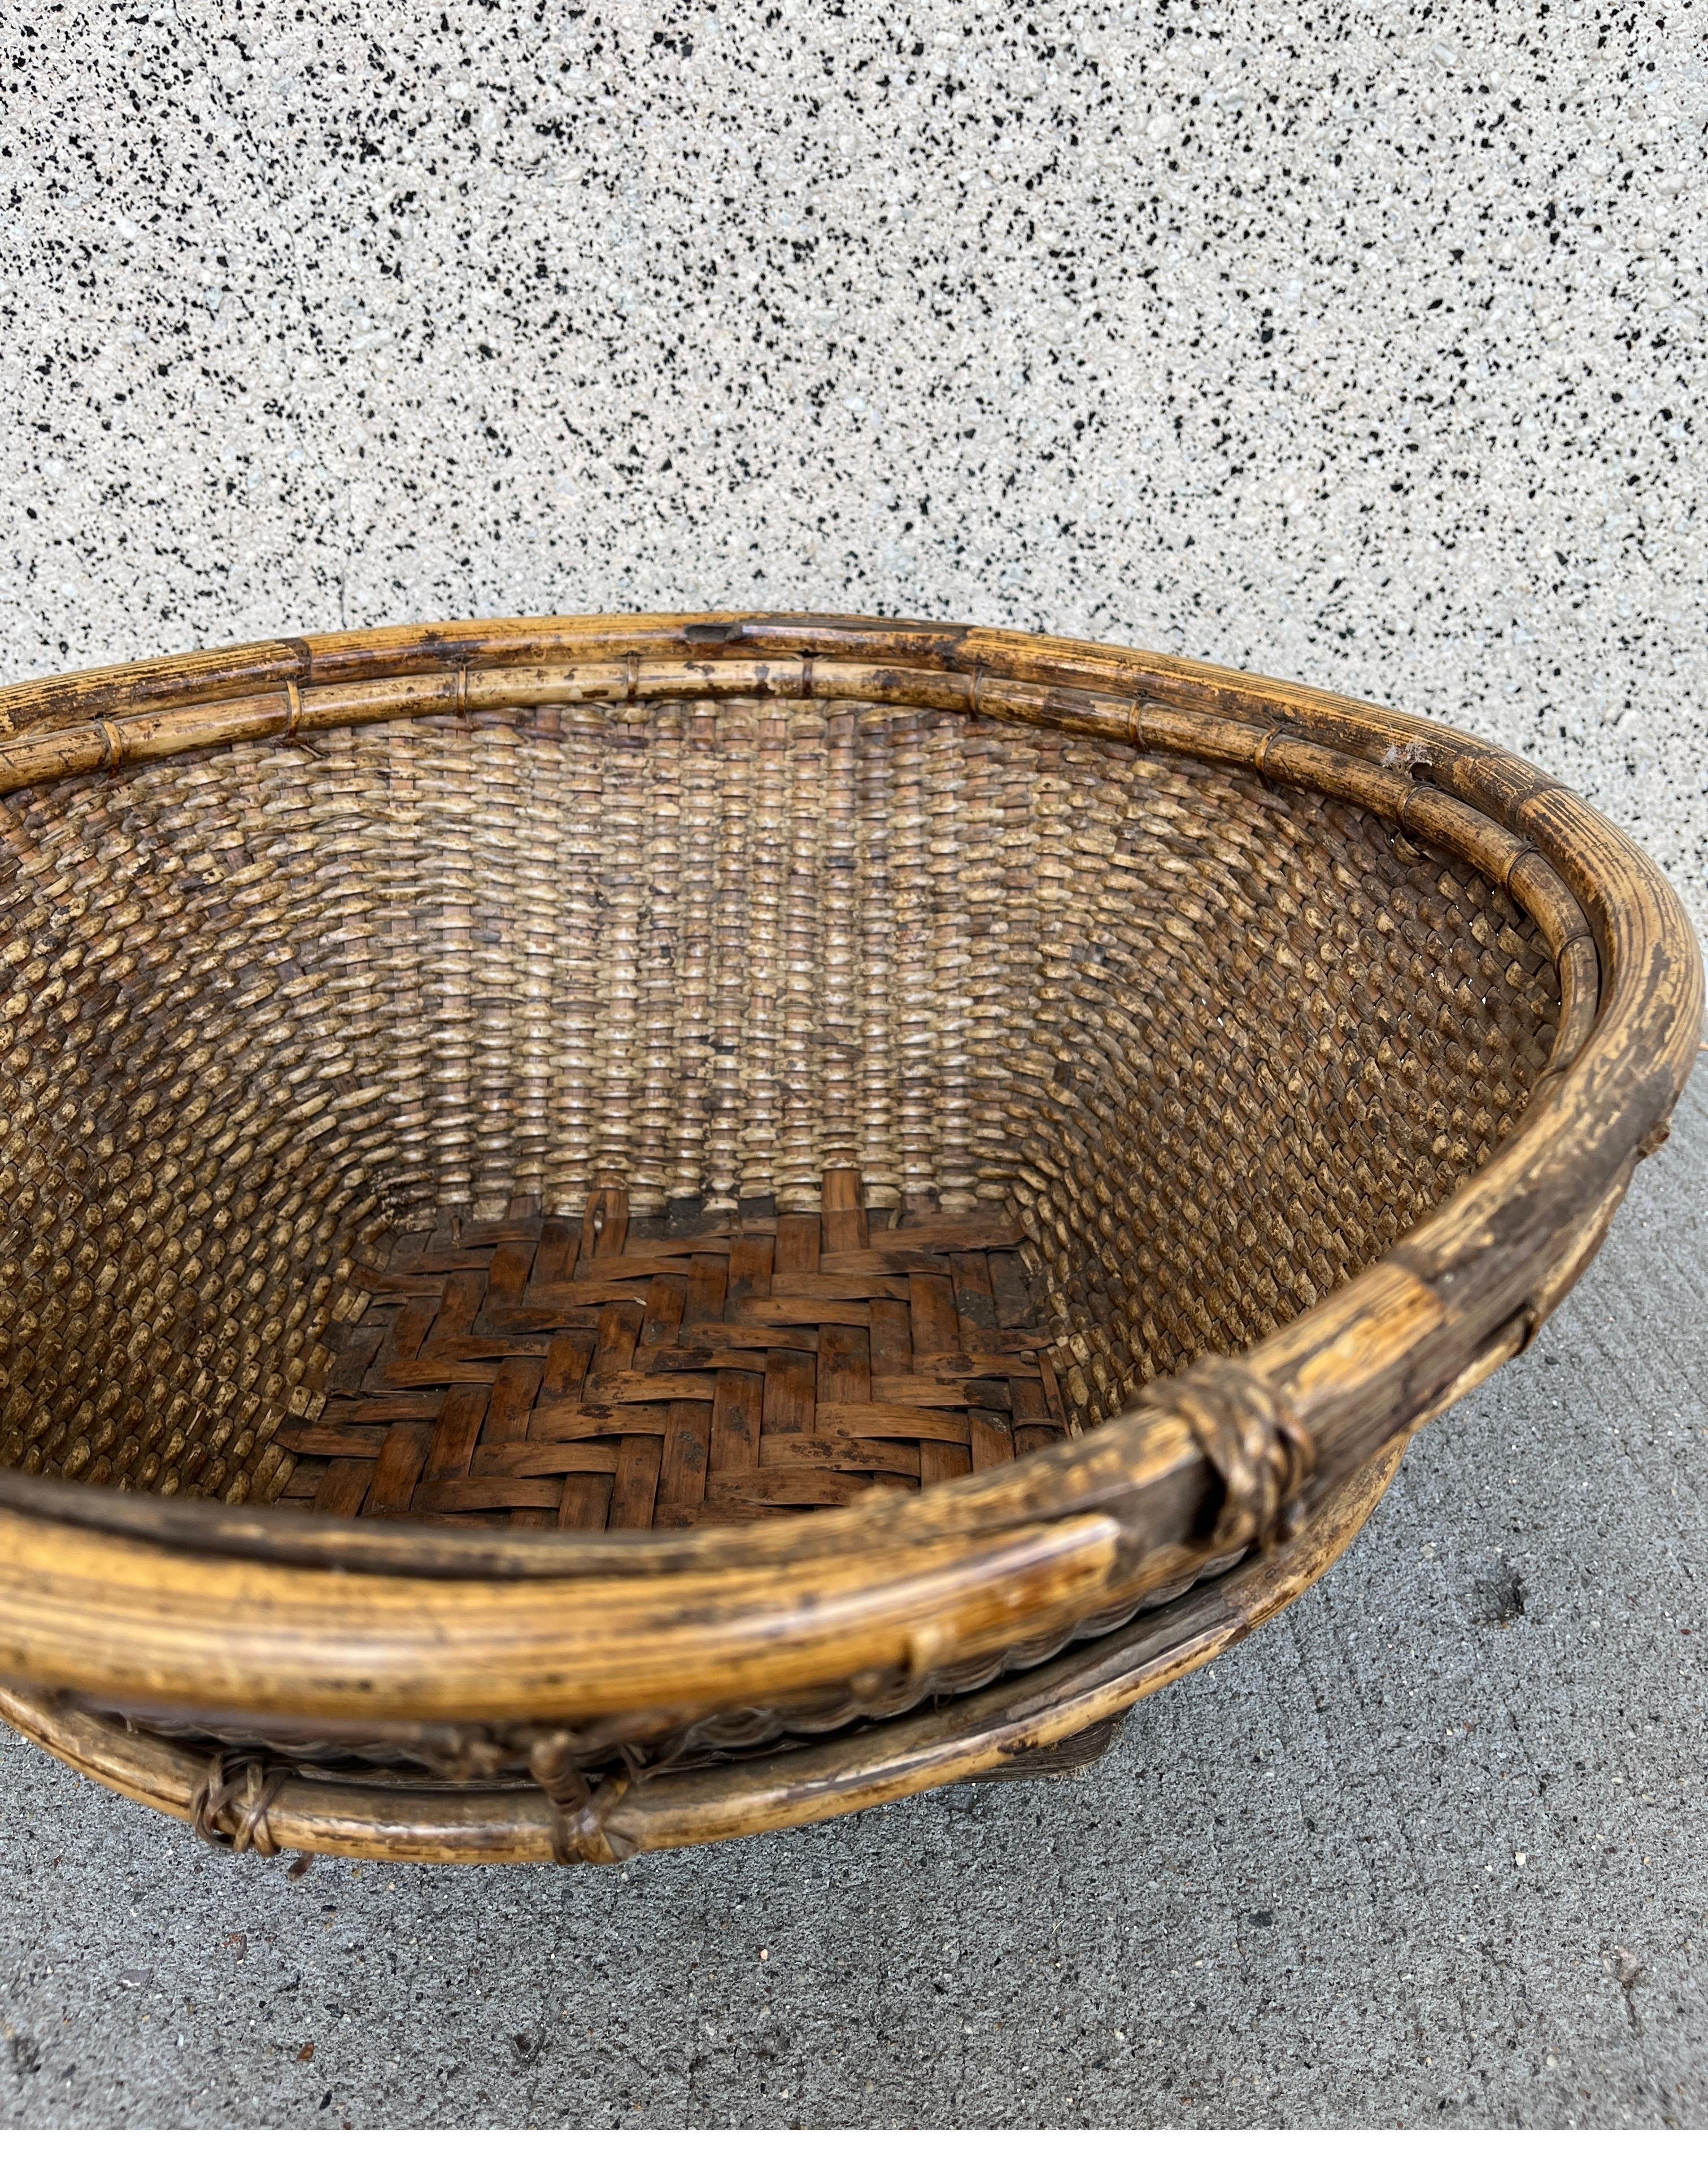 Contemporary Woven Basket, Phillipines 8